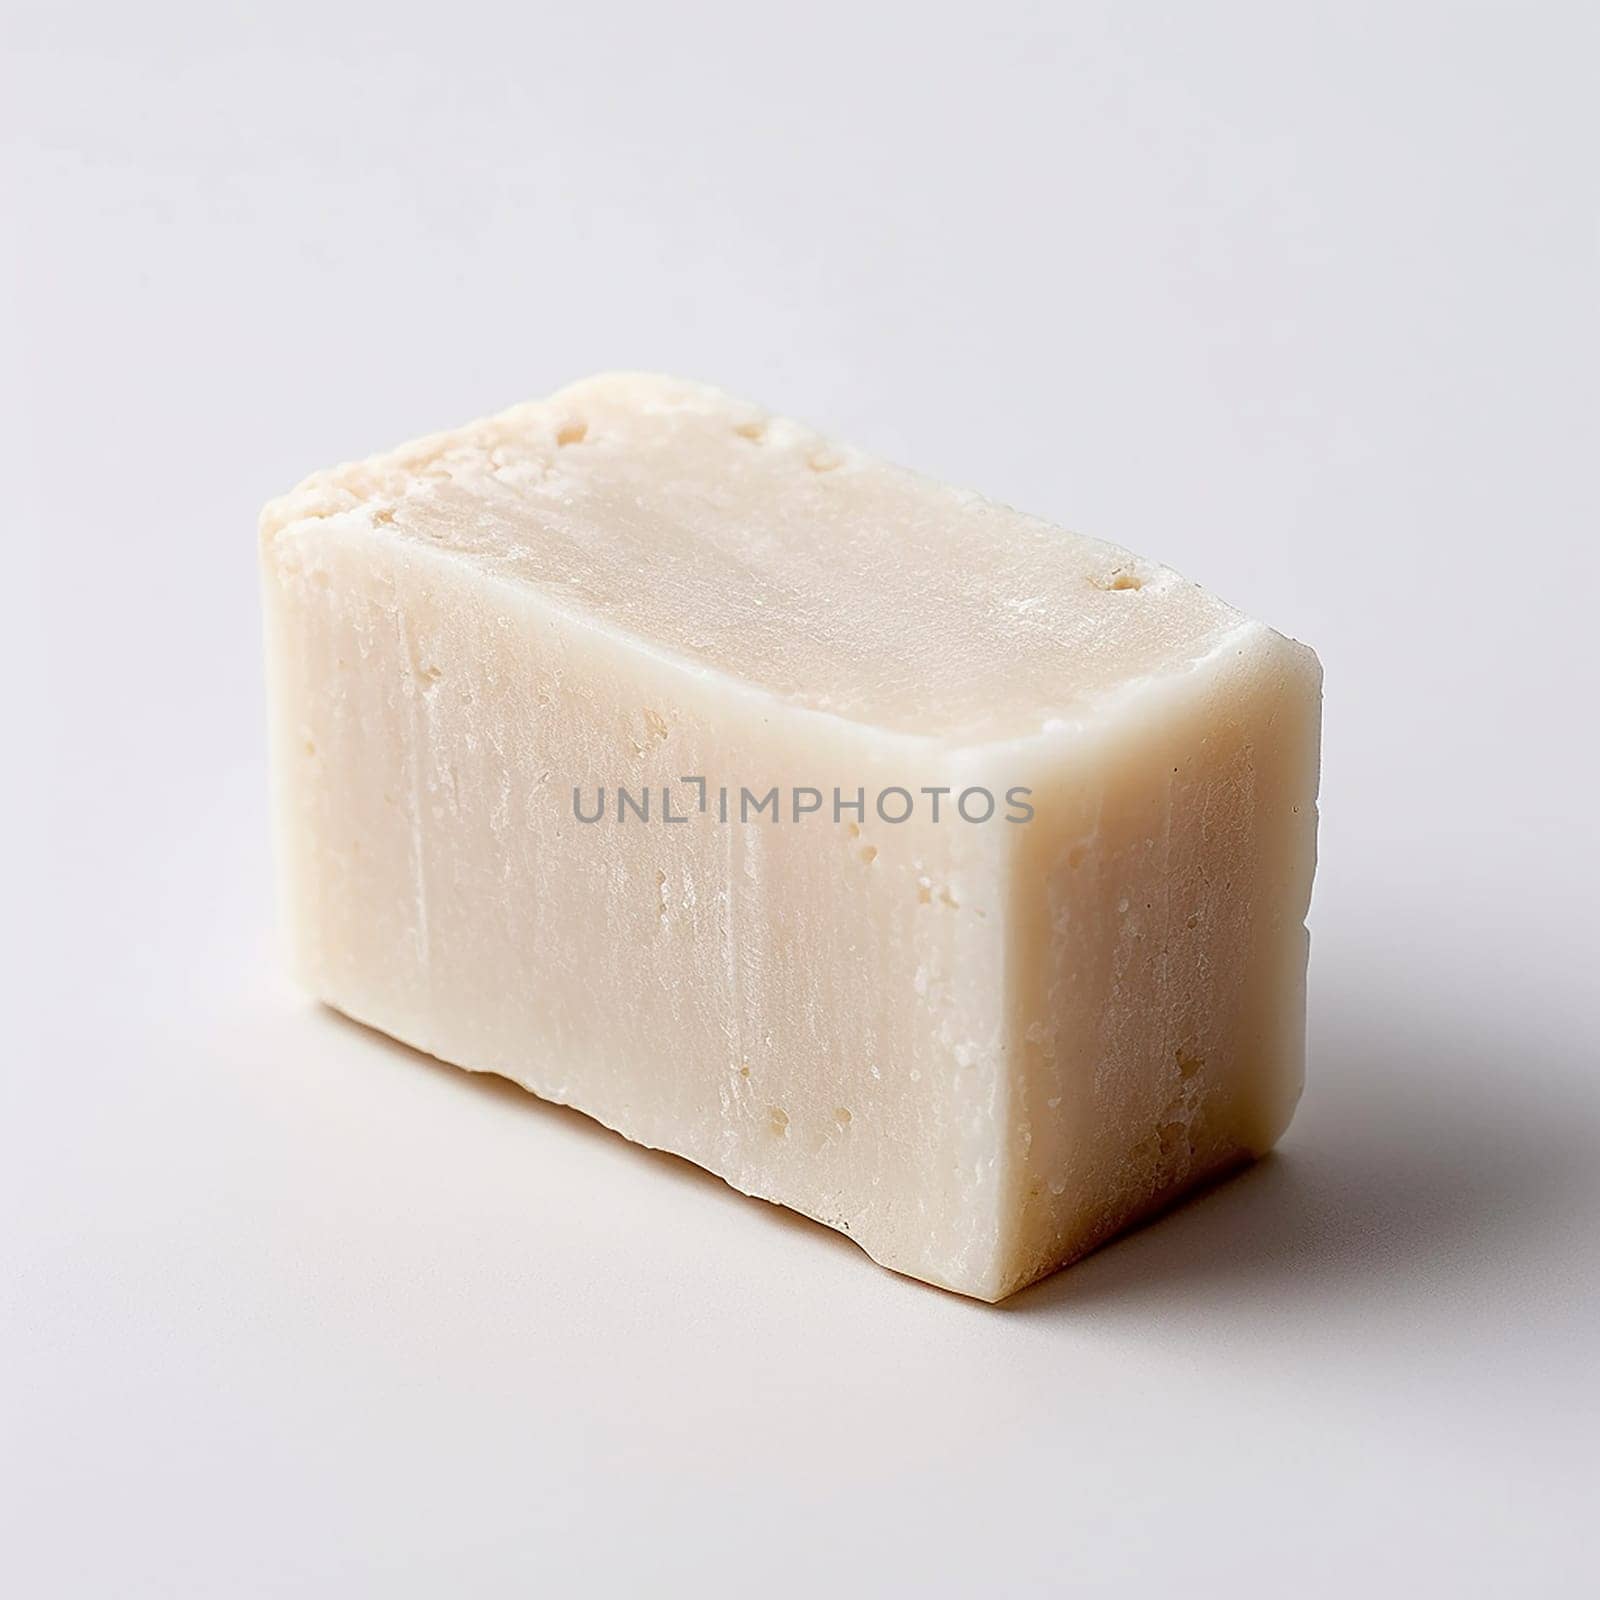 Rectangular solid bar of white soap, possibly homemade, with a textured surface. by Hype2art